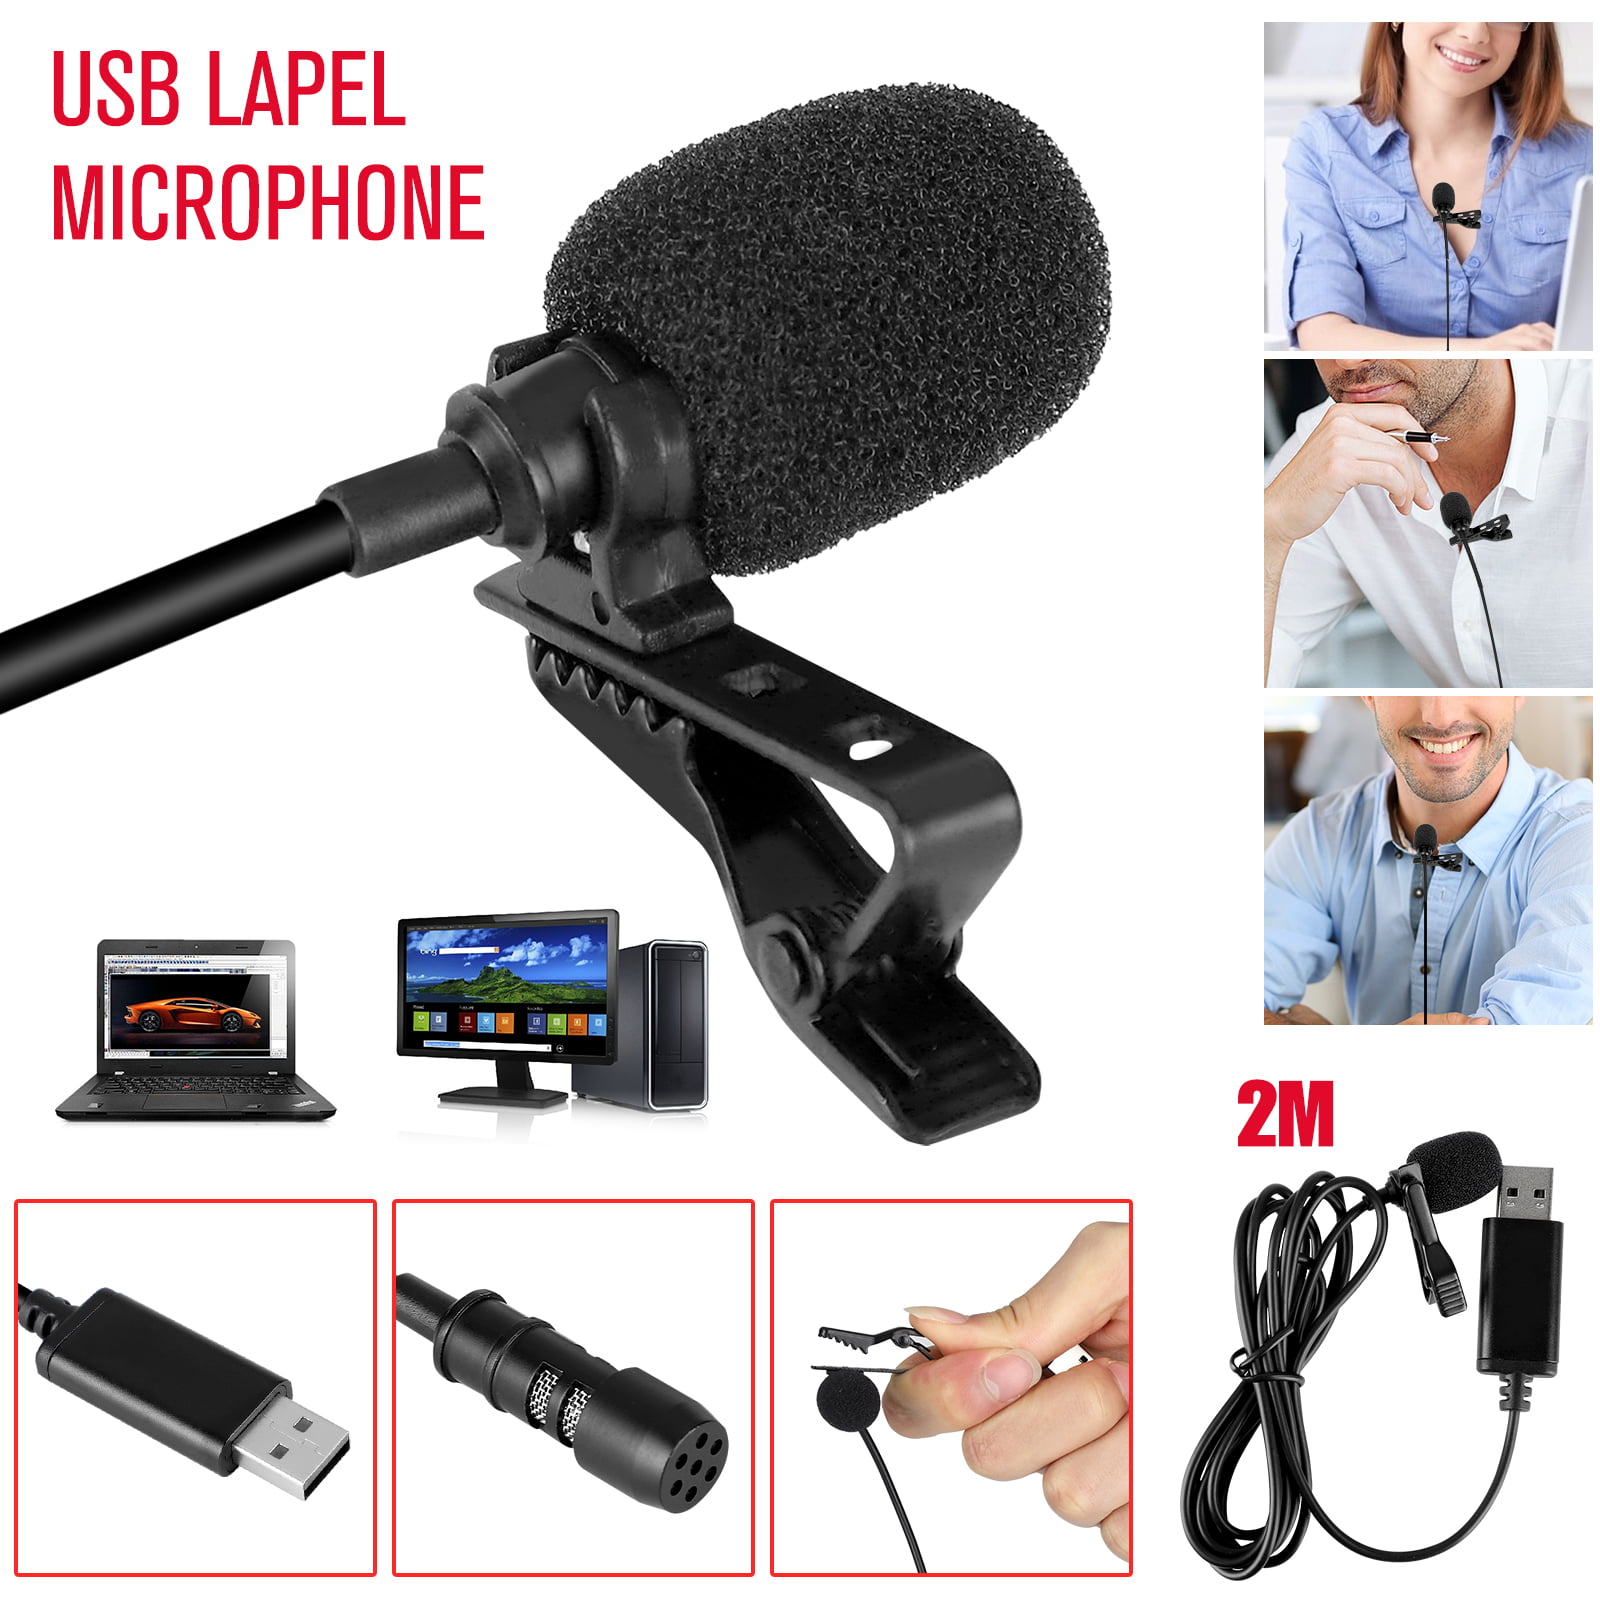 Portable Professional Clip-on Microphone Omnidirectional with Storage Bag for Recording Youtube/Interview/Video Conference etc Mini Lapel Microphone USB